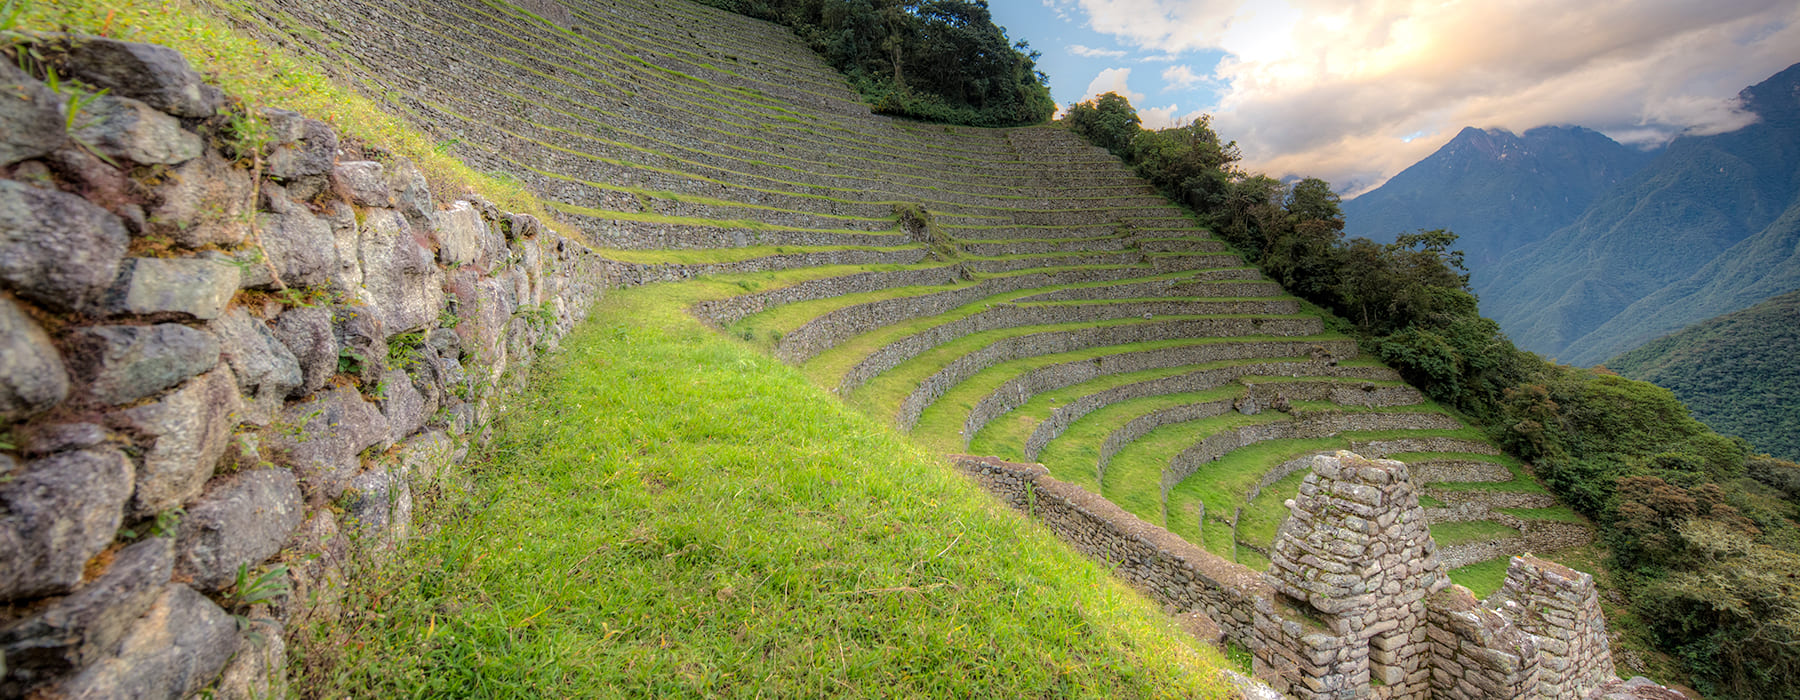 WHERE DOES THE INCA TRAIL START?